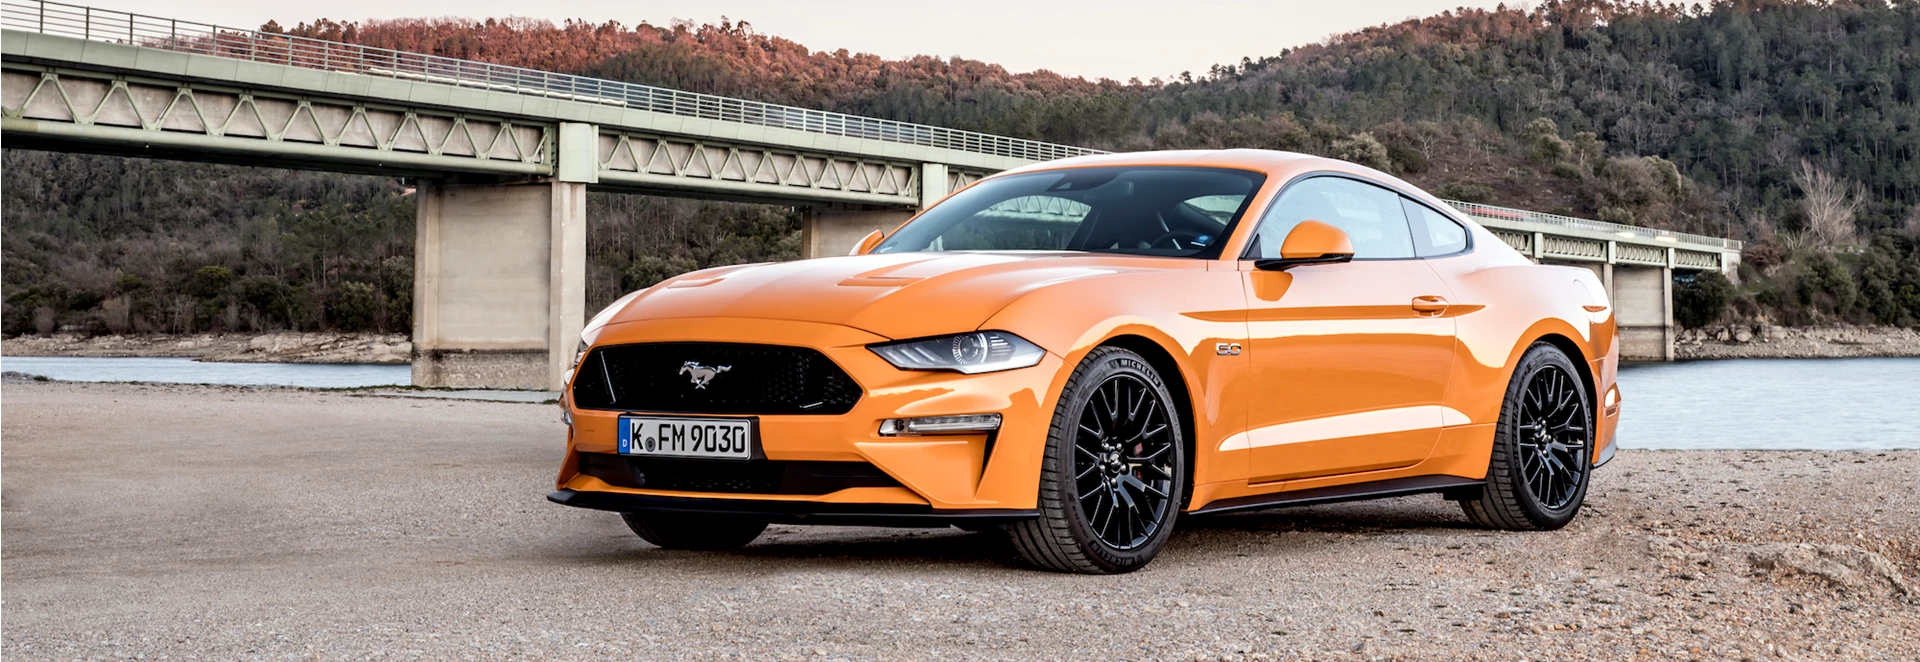 2018 Ford Mustang GT review